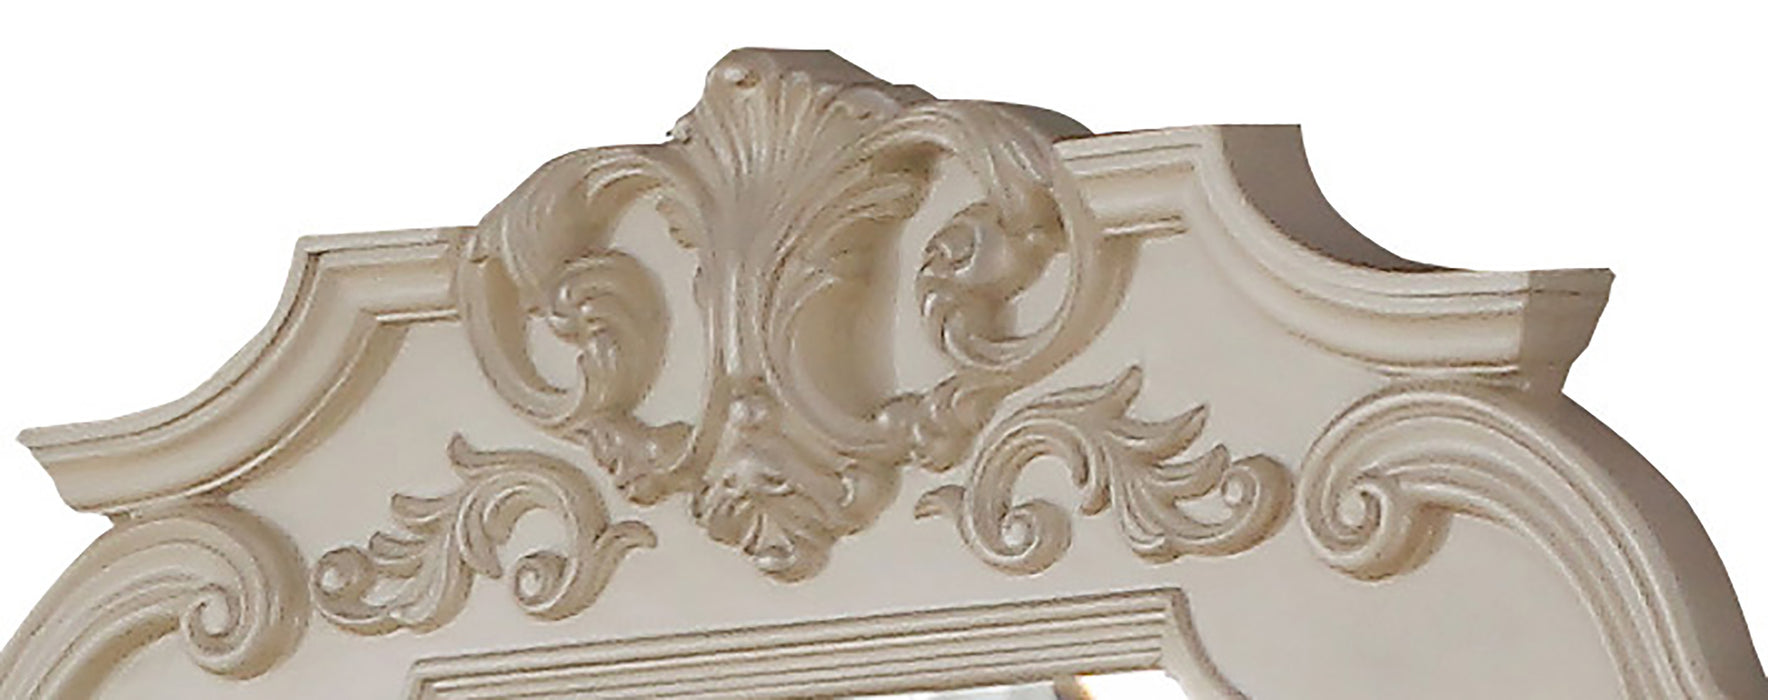 Victoria Traditional Style Mirror in Off-White finish Wood